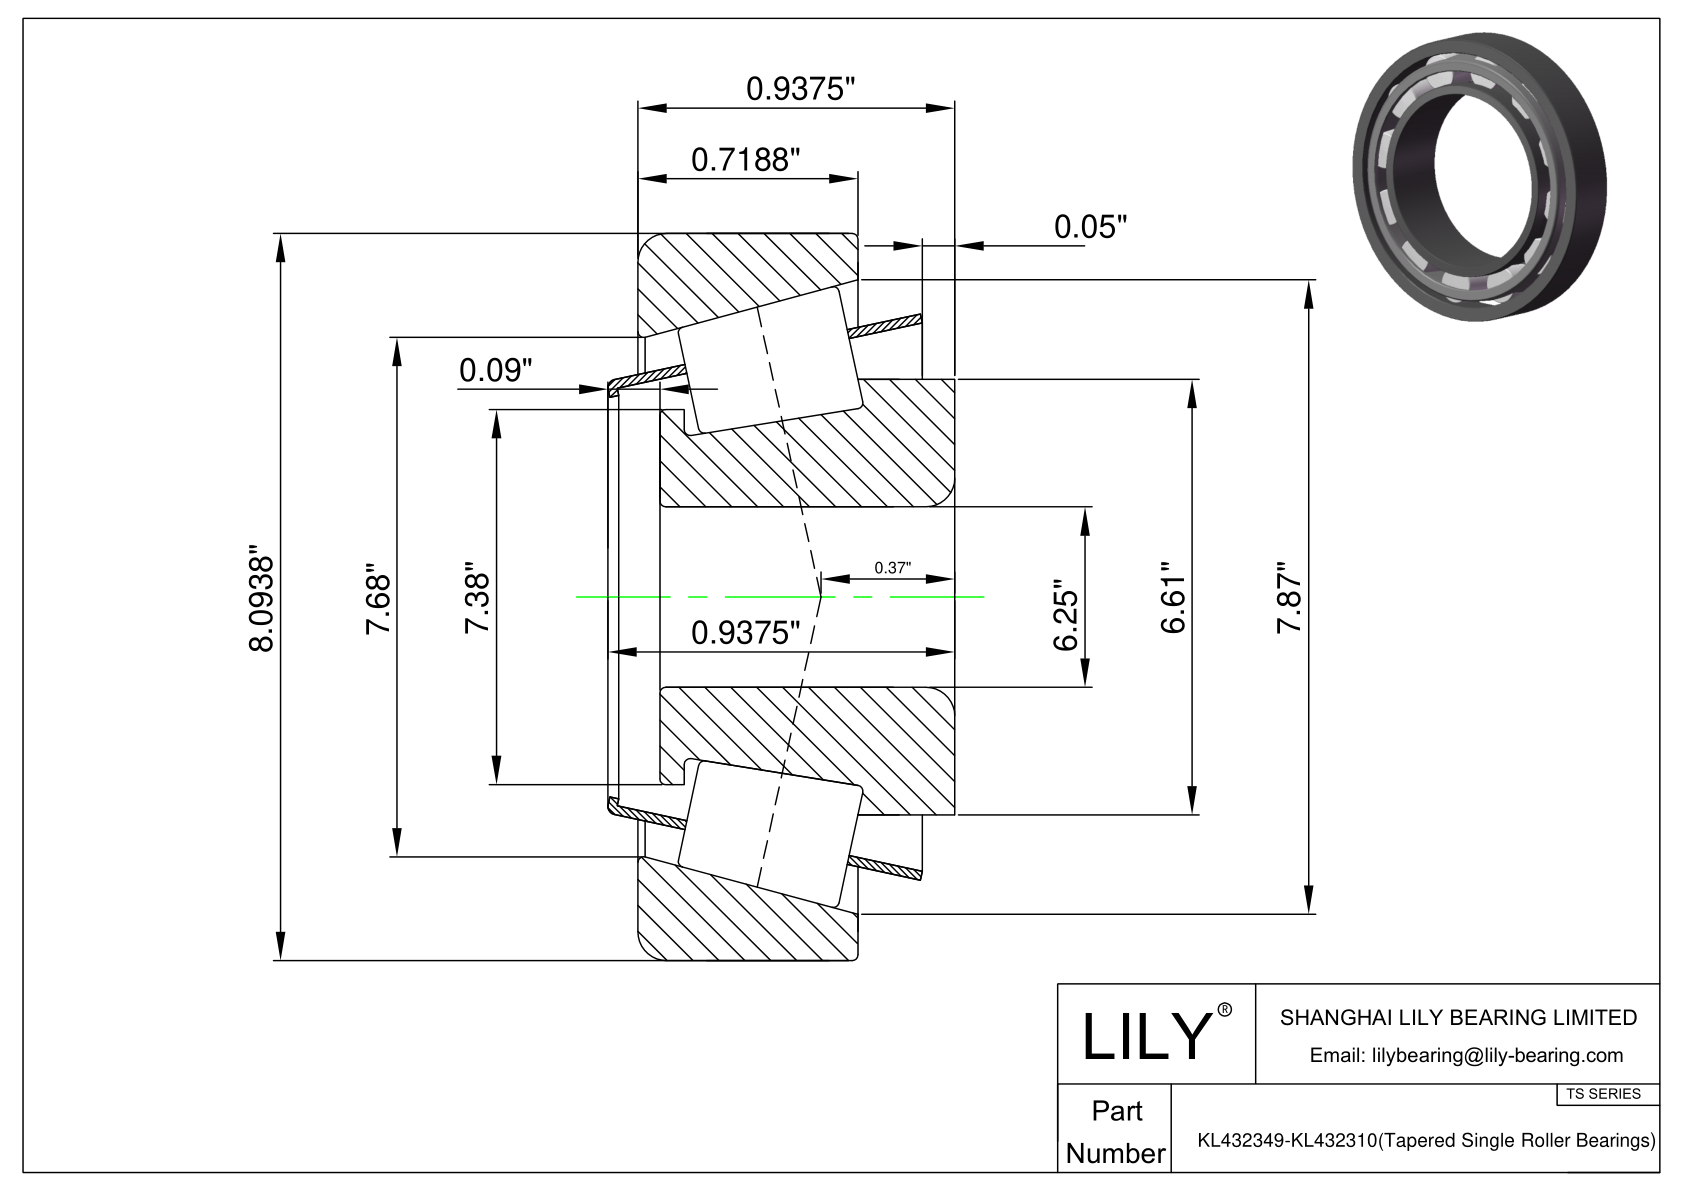 KL432349-KL432310 TS (Tapered Single Roller Bearings) (Imperial) cad drawing